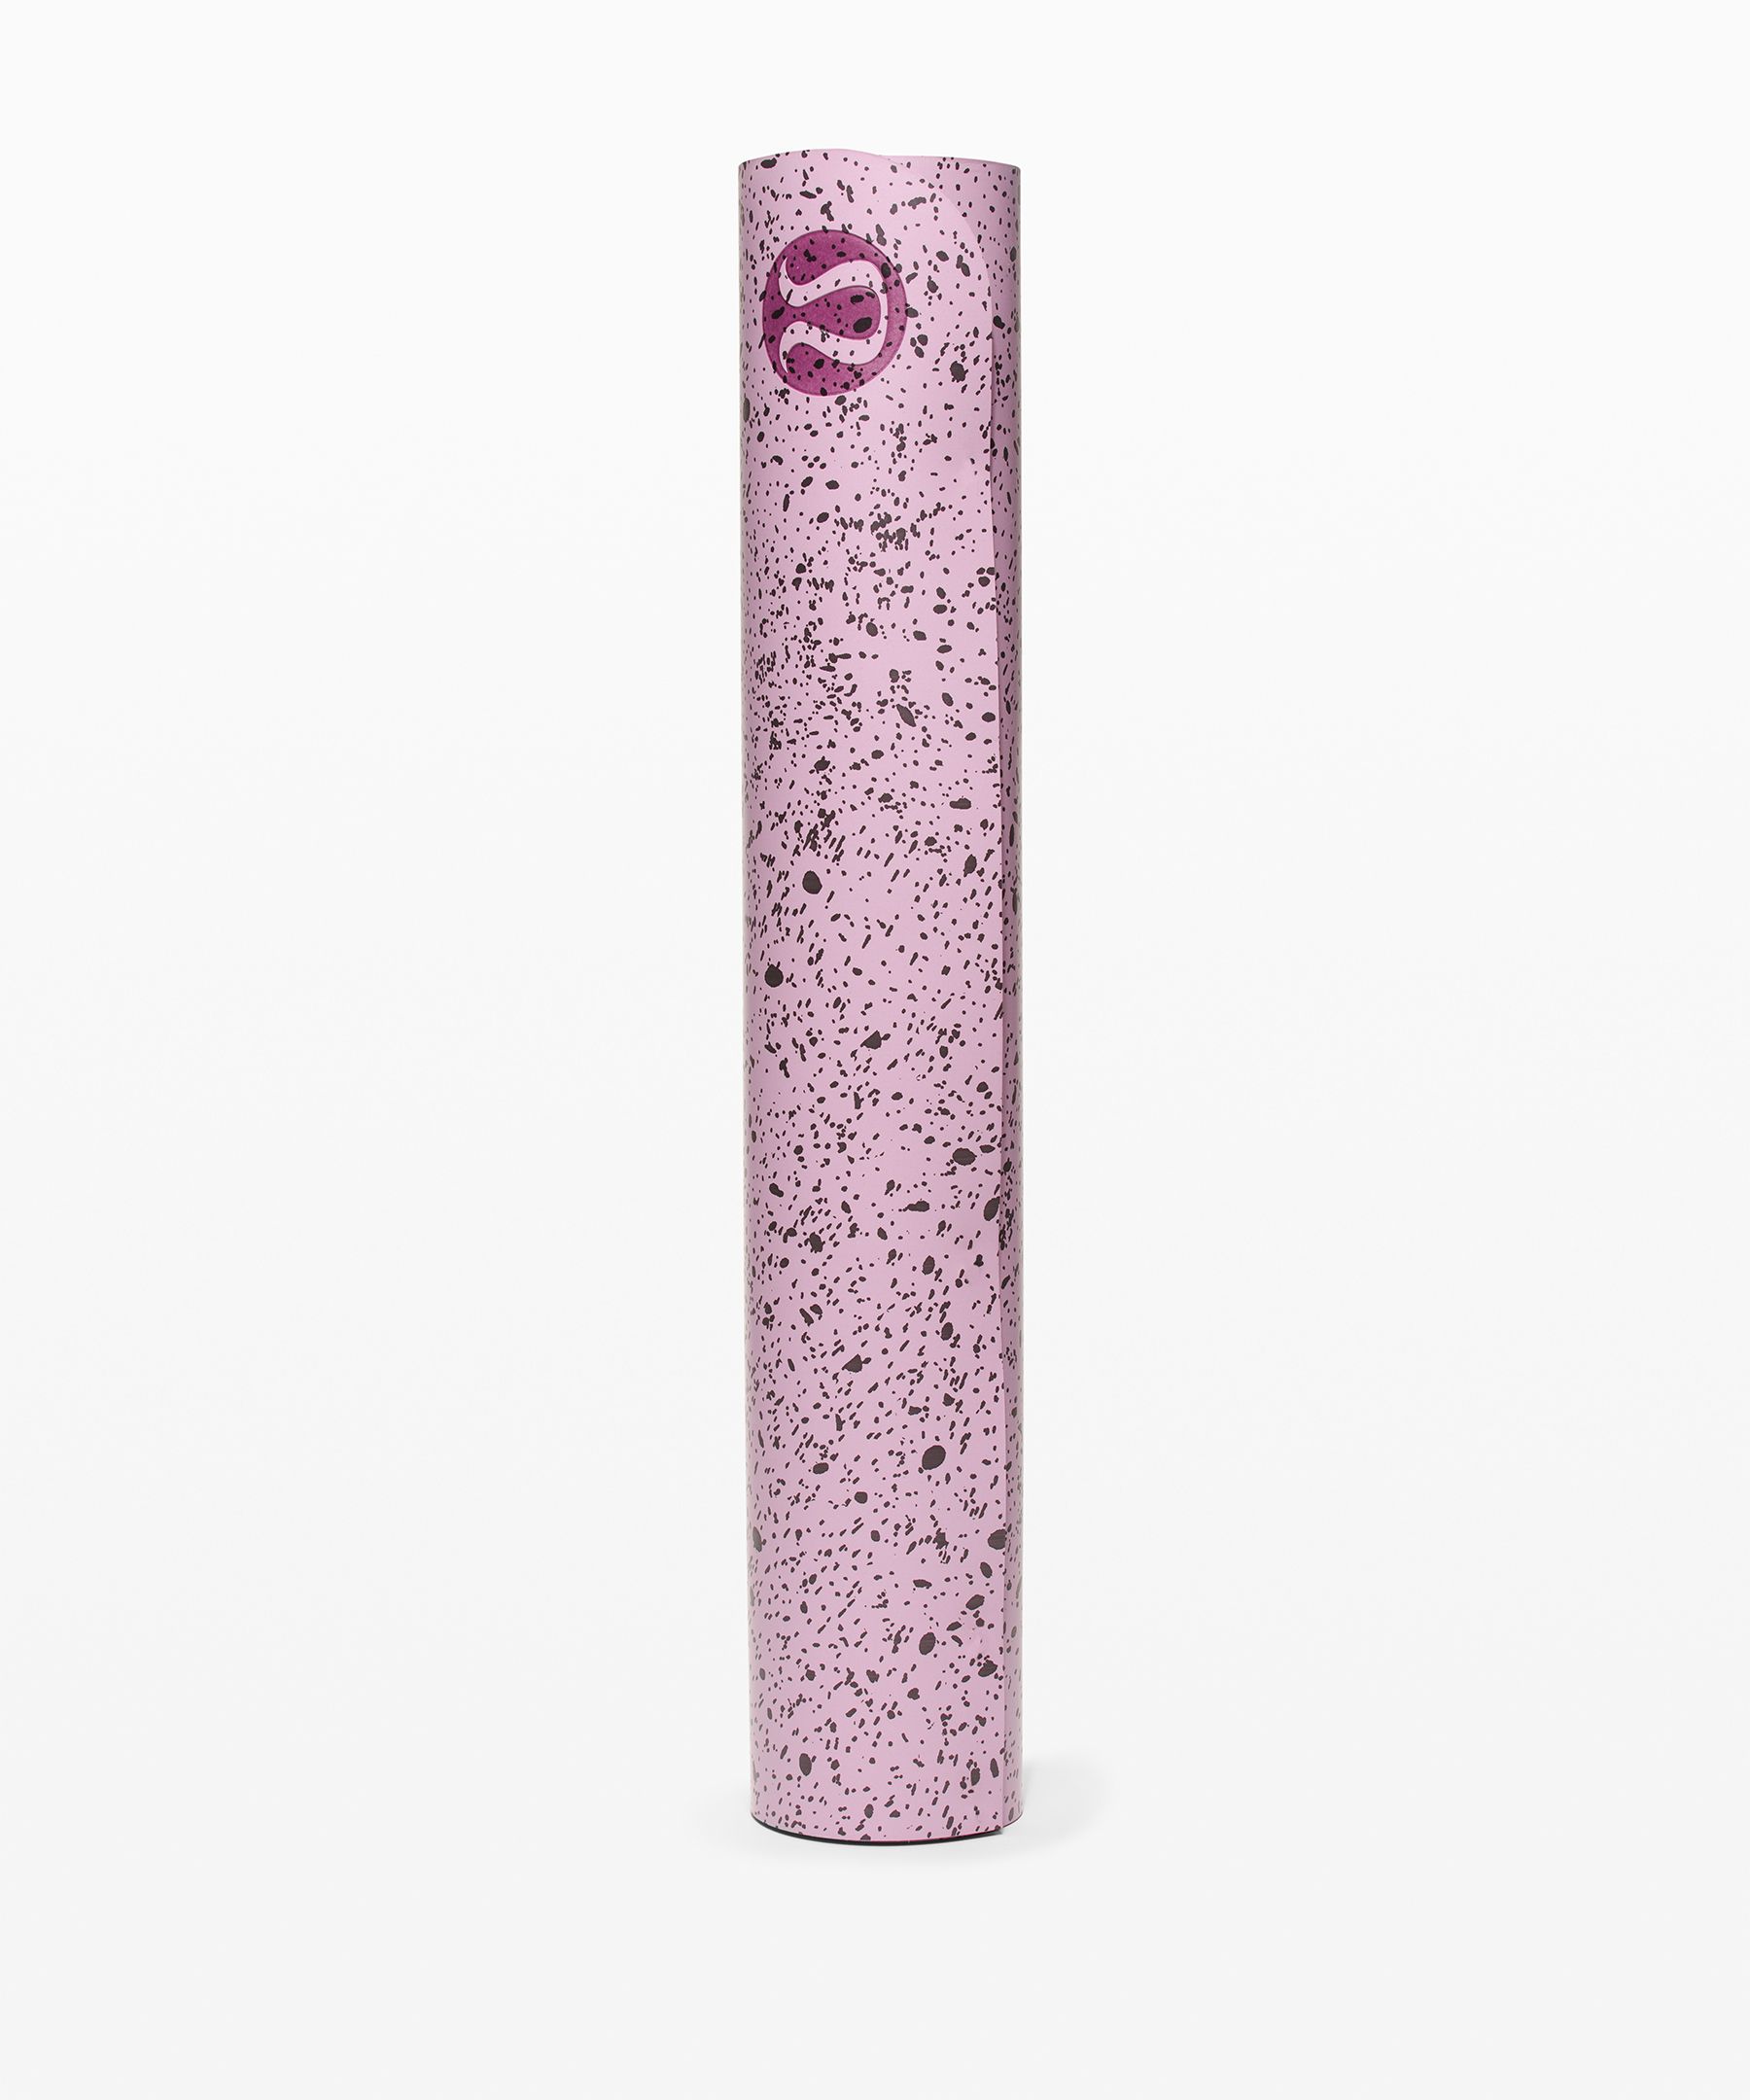 Lululemon The Reversible Mat 5mm In Accelerate Mat Dusty Rose